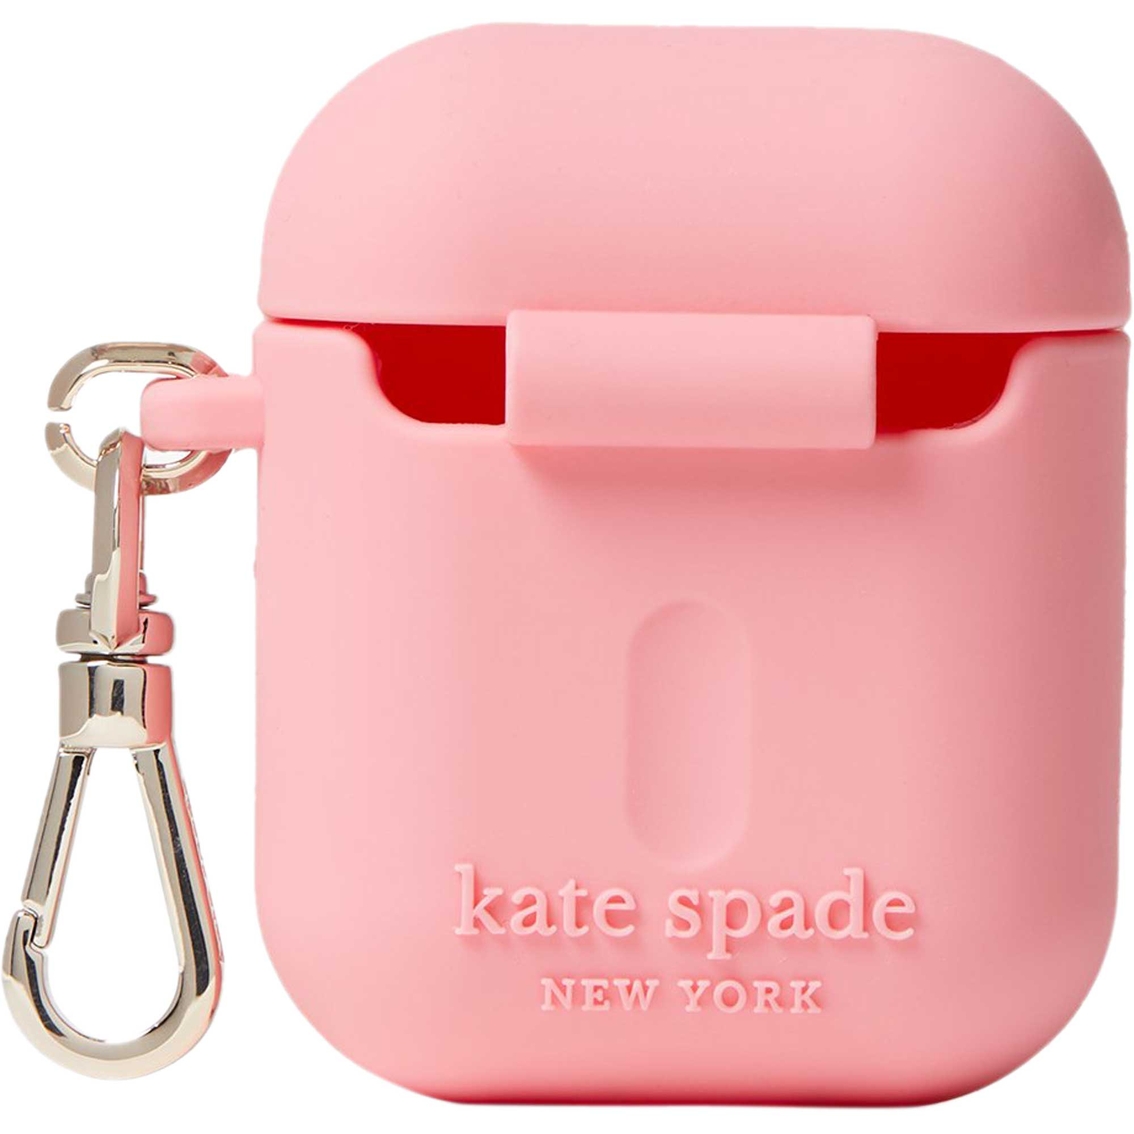 Kate Spade New York Airpod Case | Apple Accessories | Home Office